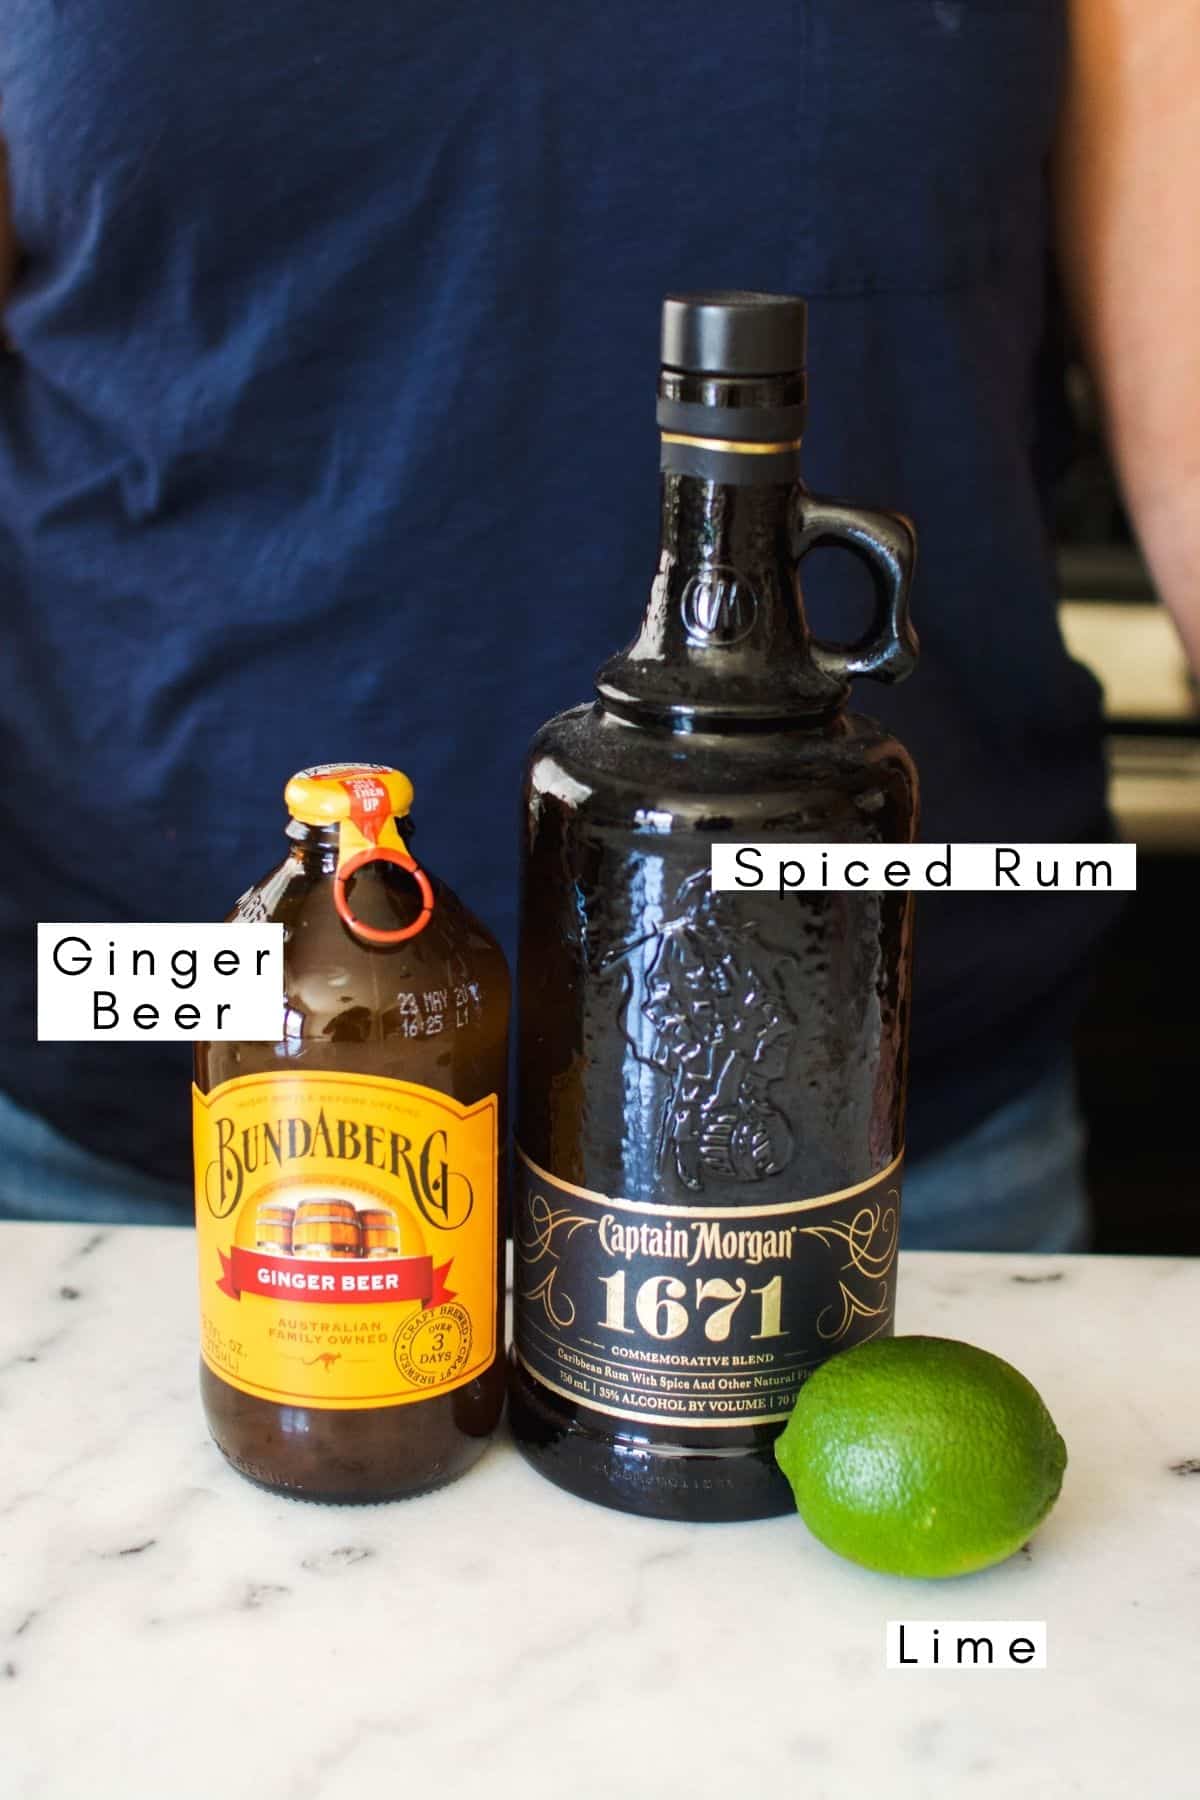 Labeled ingredients to make a dark and stormy cocktail recipe.